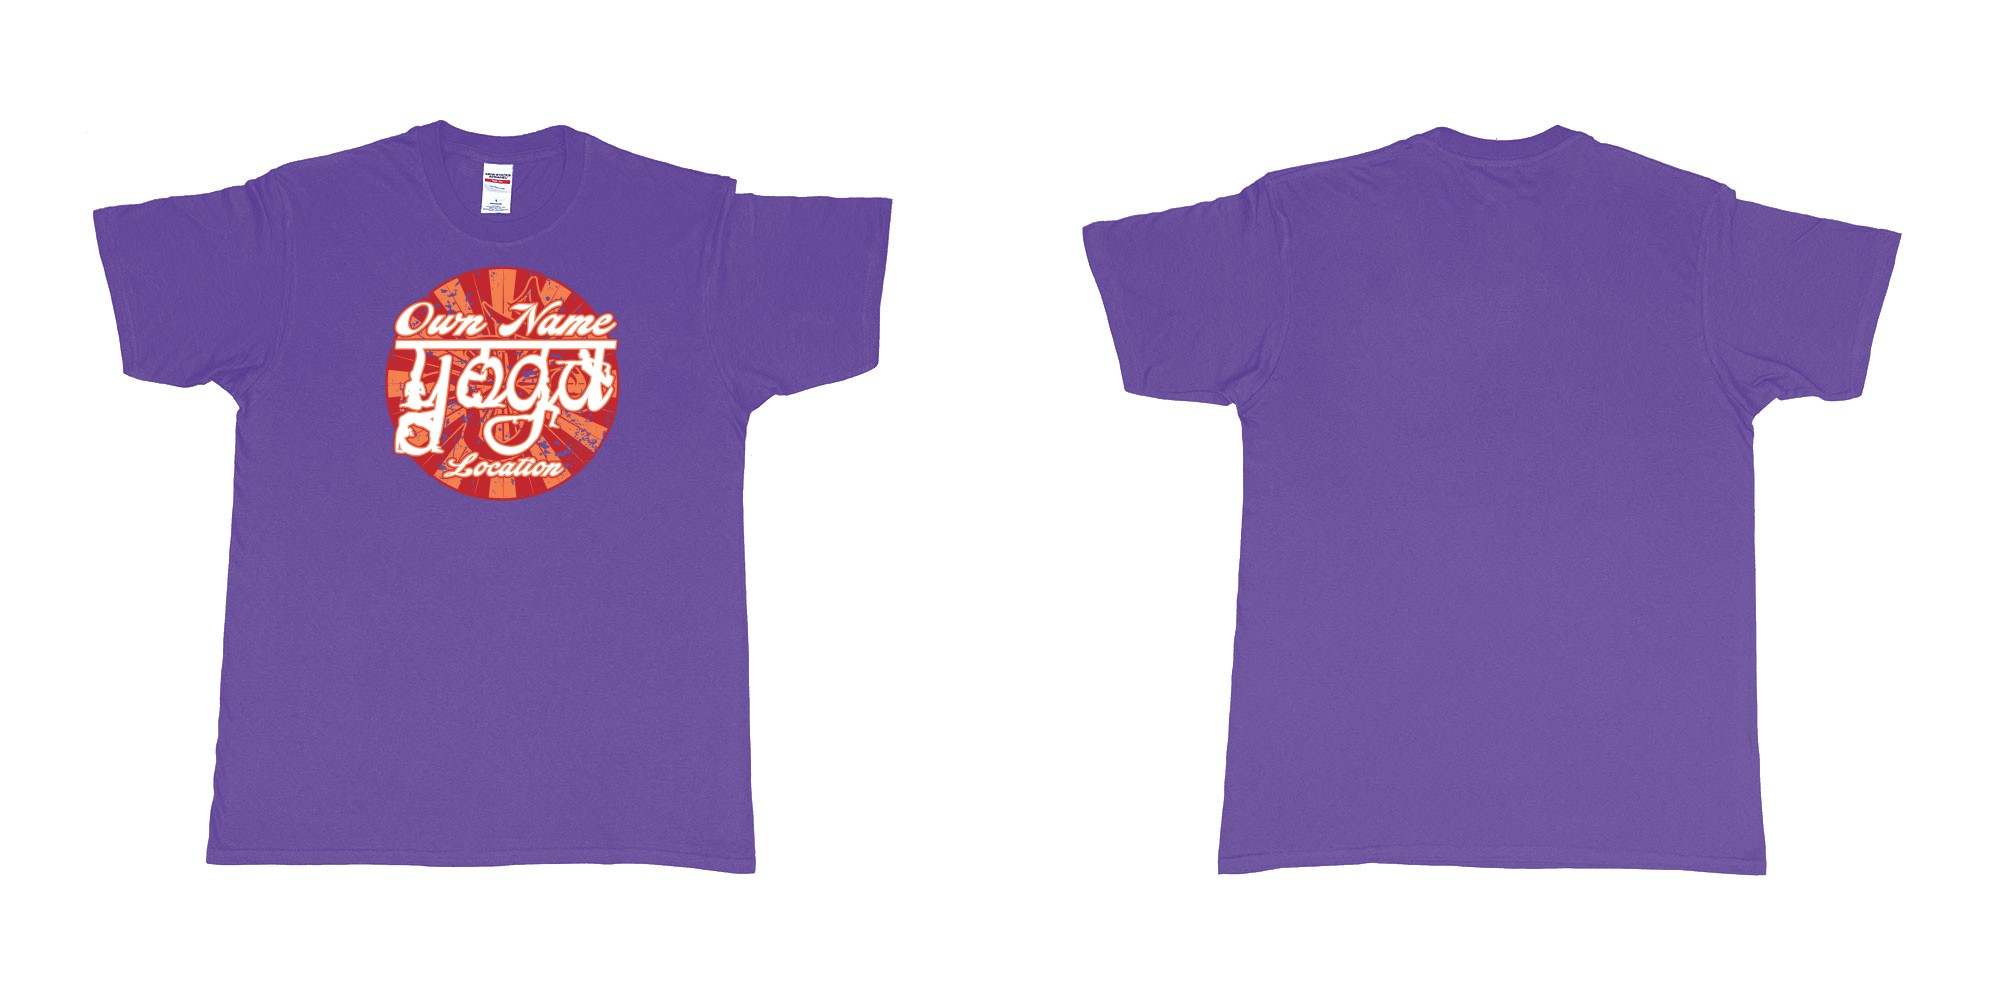 Custom tshirt design  in fabric color purple choice your own text made in Bali by The Pirate Way